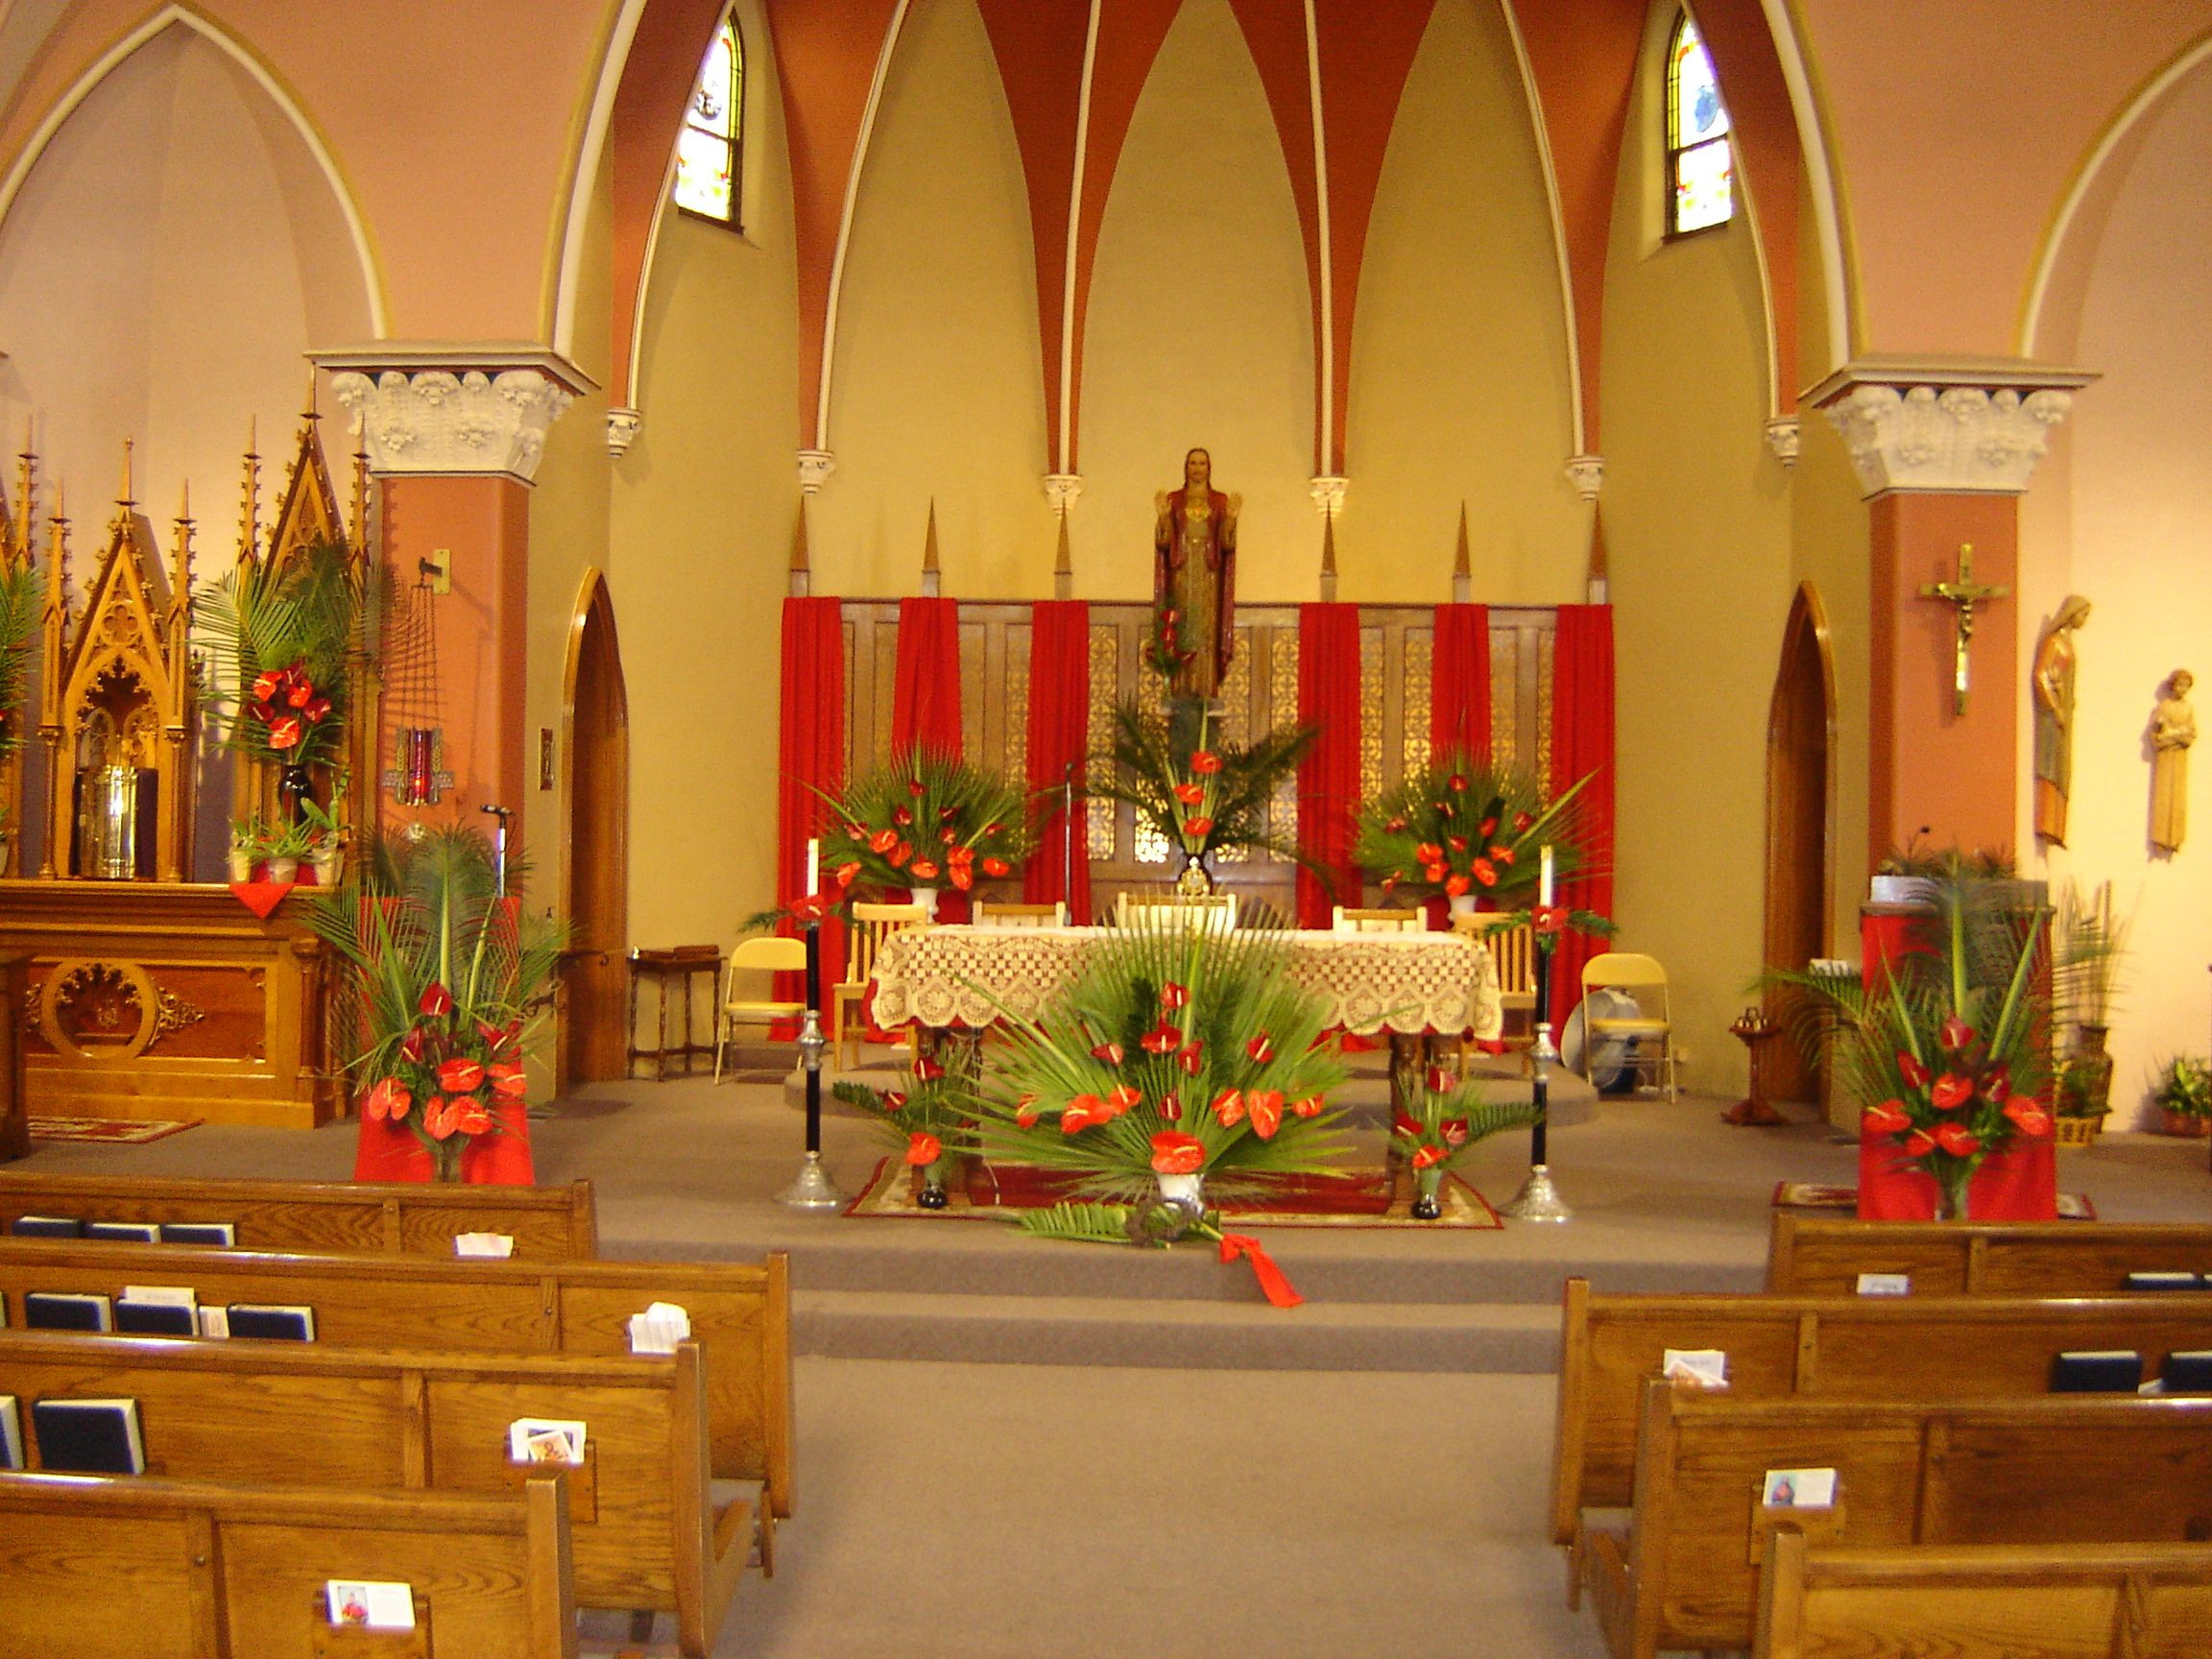 Easter Service Ideas For Small Churches
 Decorating an Altar for Palm Passion Sunday